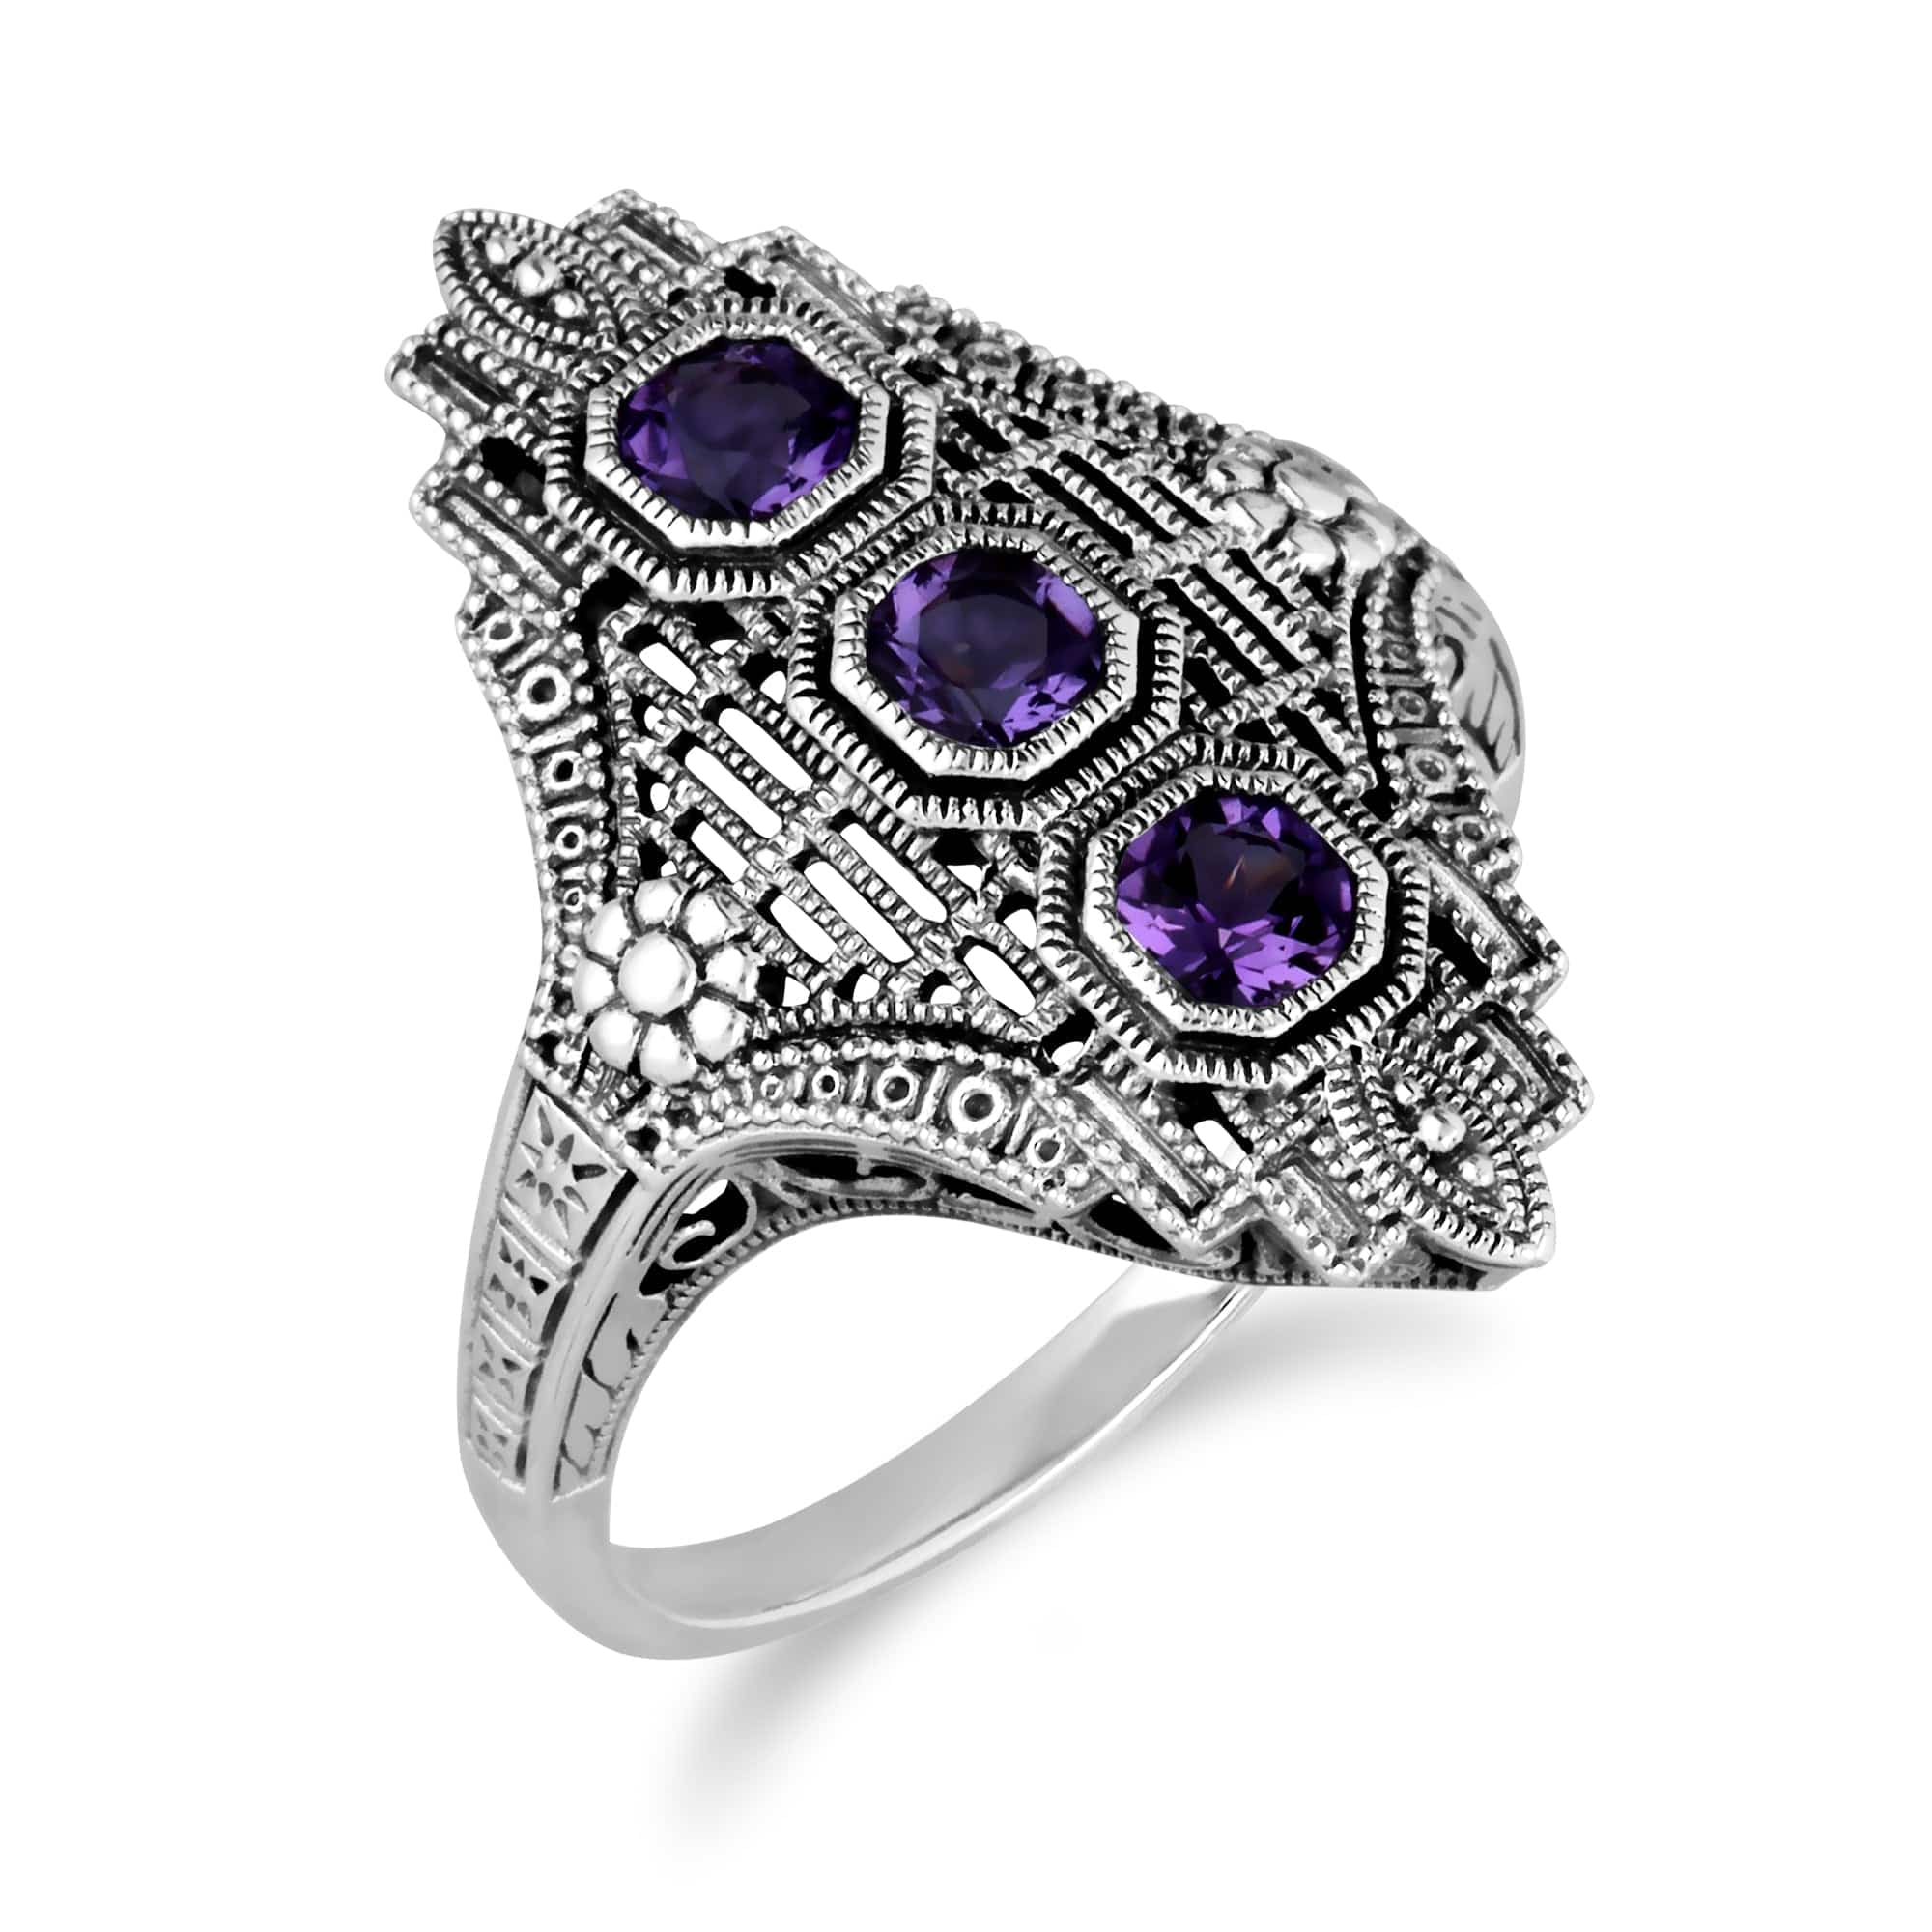 241R210502925 Art Nouveau Style Octagon Amethyst Three Stone Filigree Statement Ring in 925 Sterling Silver 3